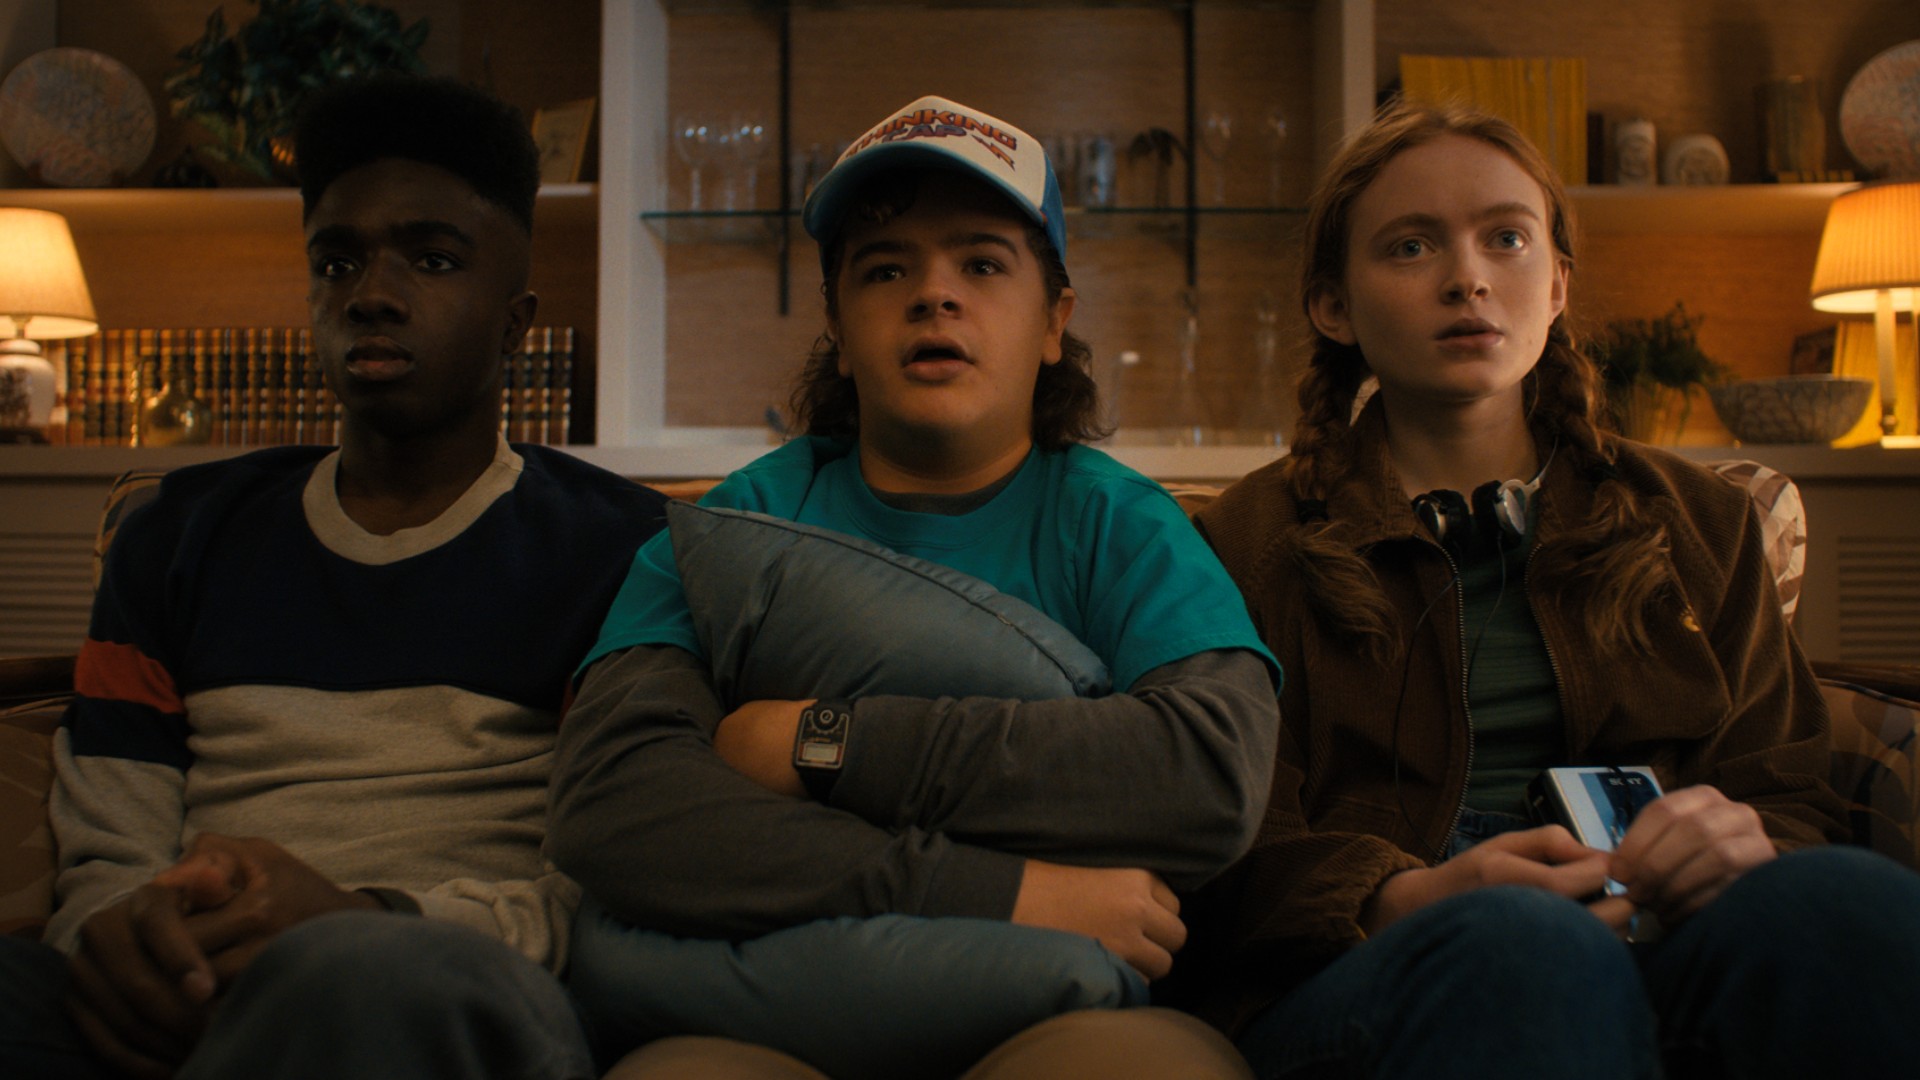 Stranger Things creators reveal the characters they regret killing off